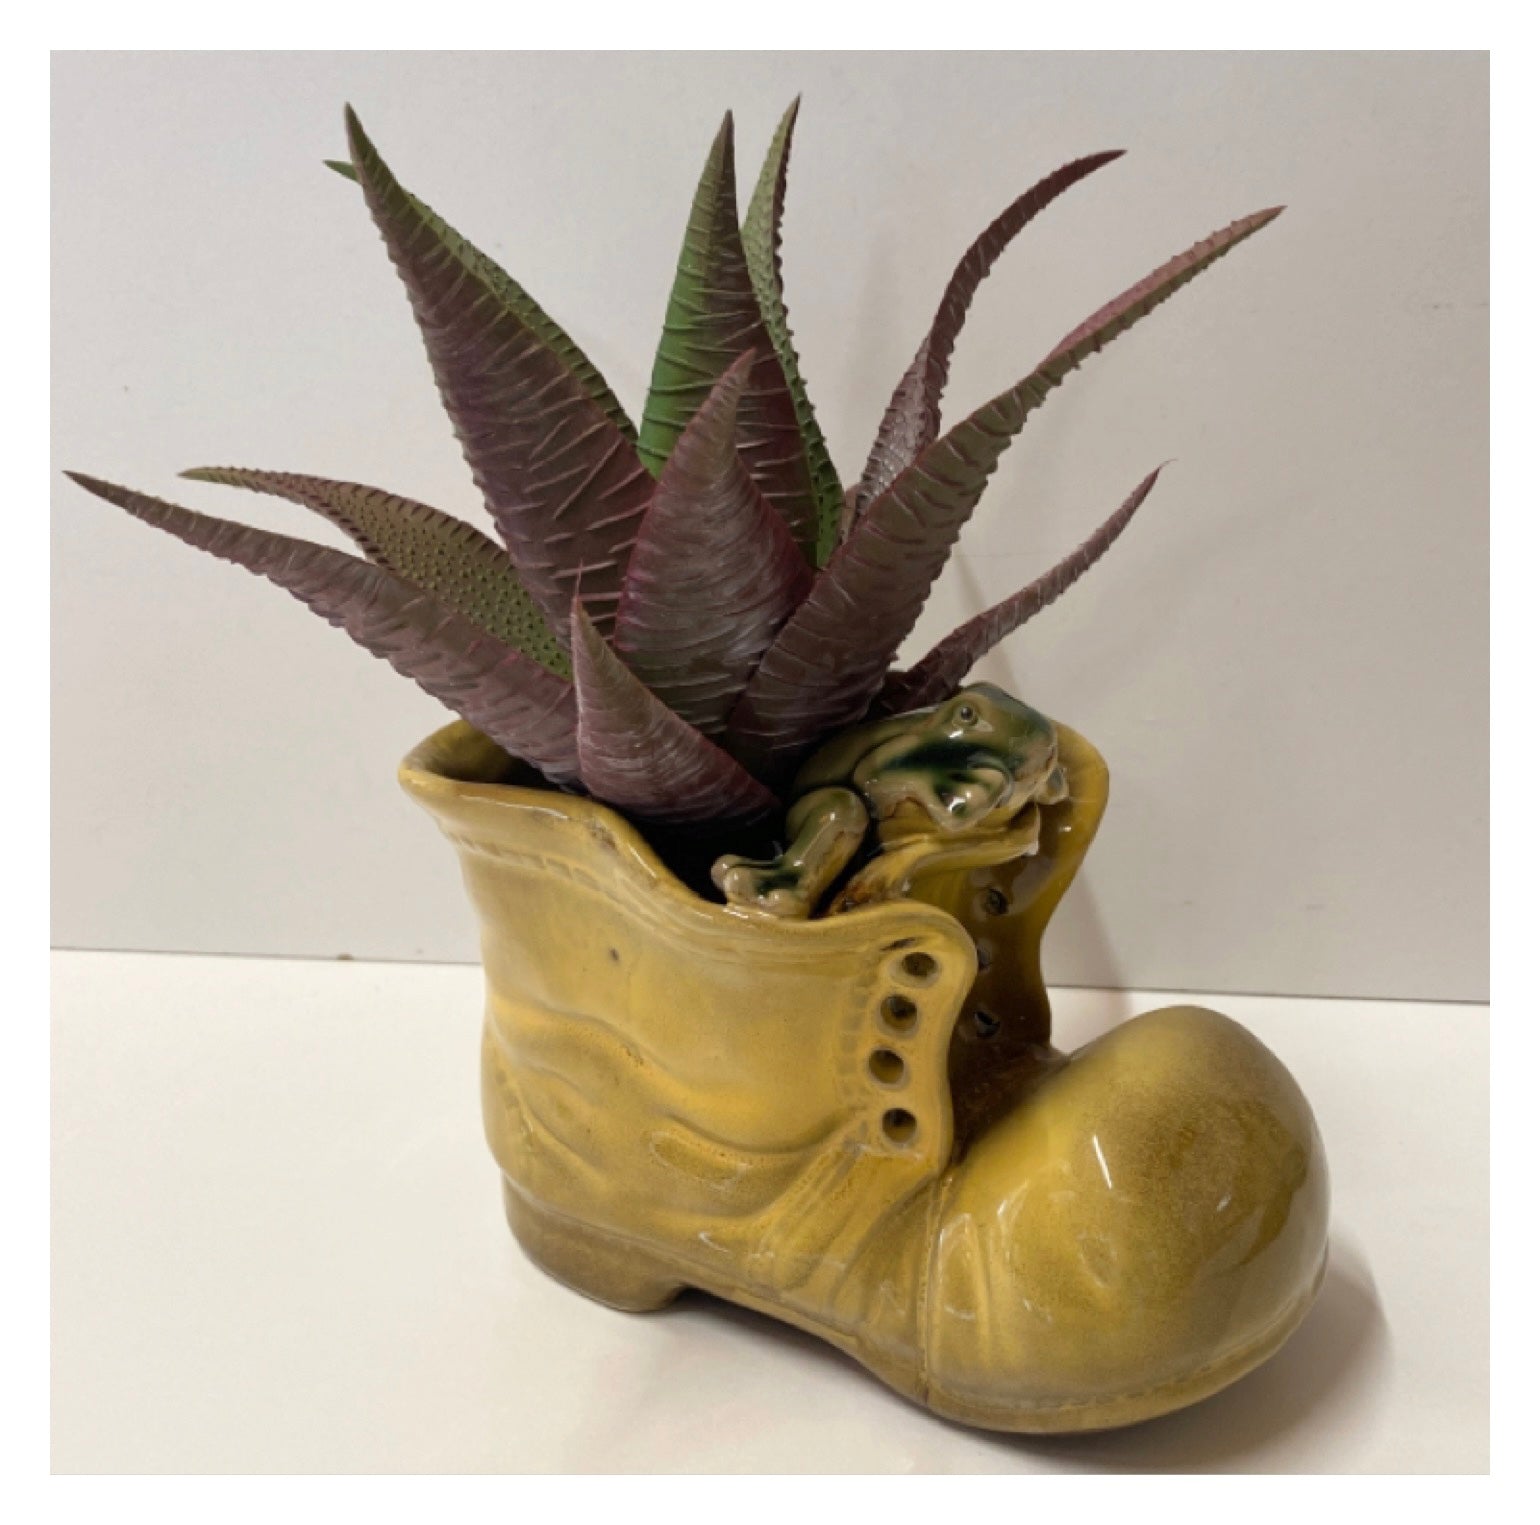 Shoe Boot Planter Garden Pot with Frog Mustard - The Renmy Store Homewares & Gifts 